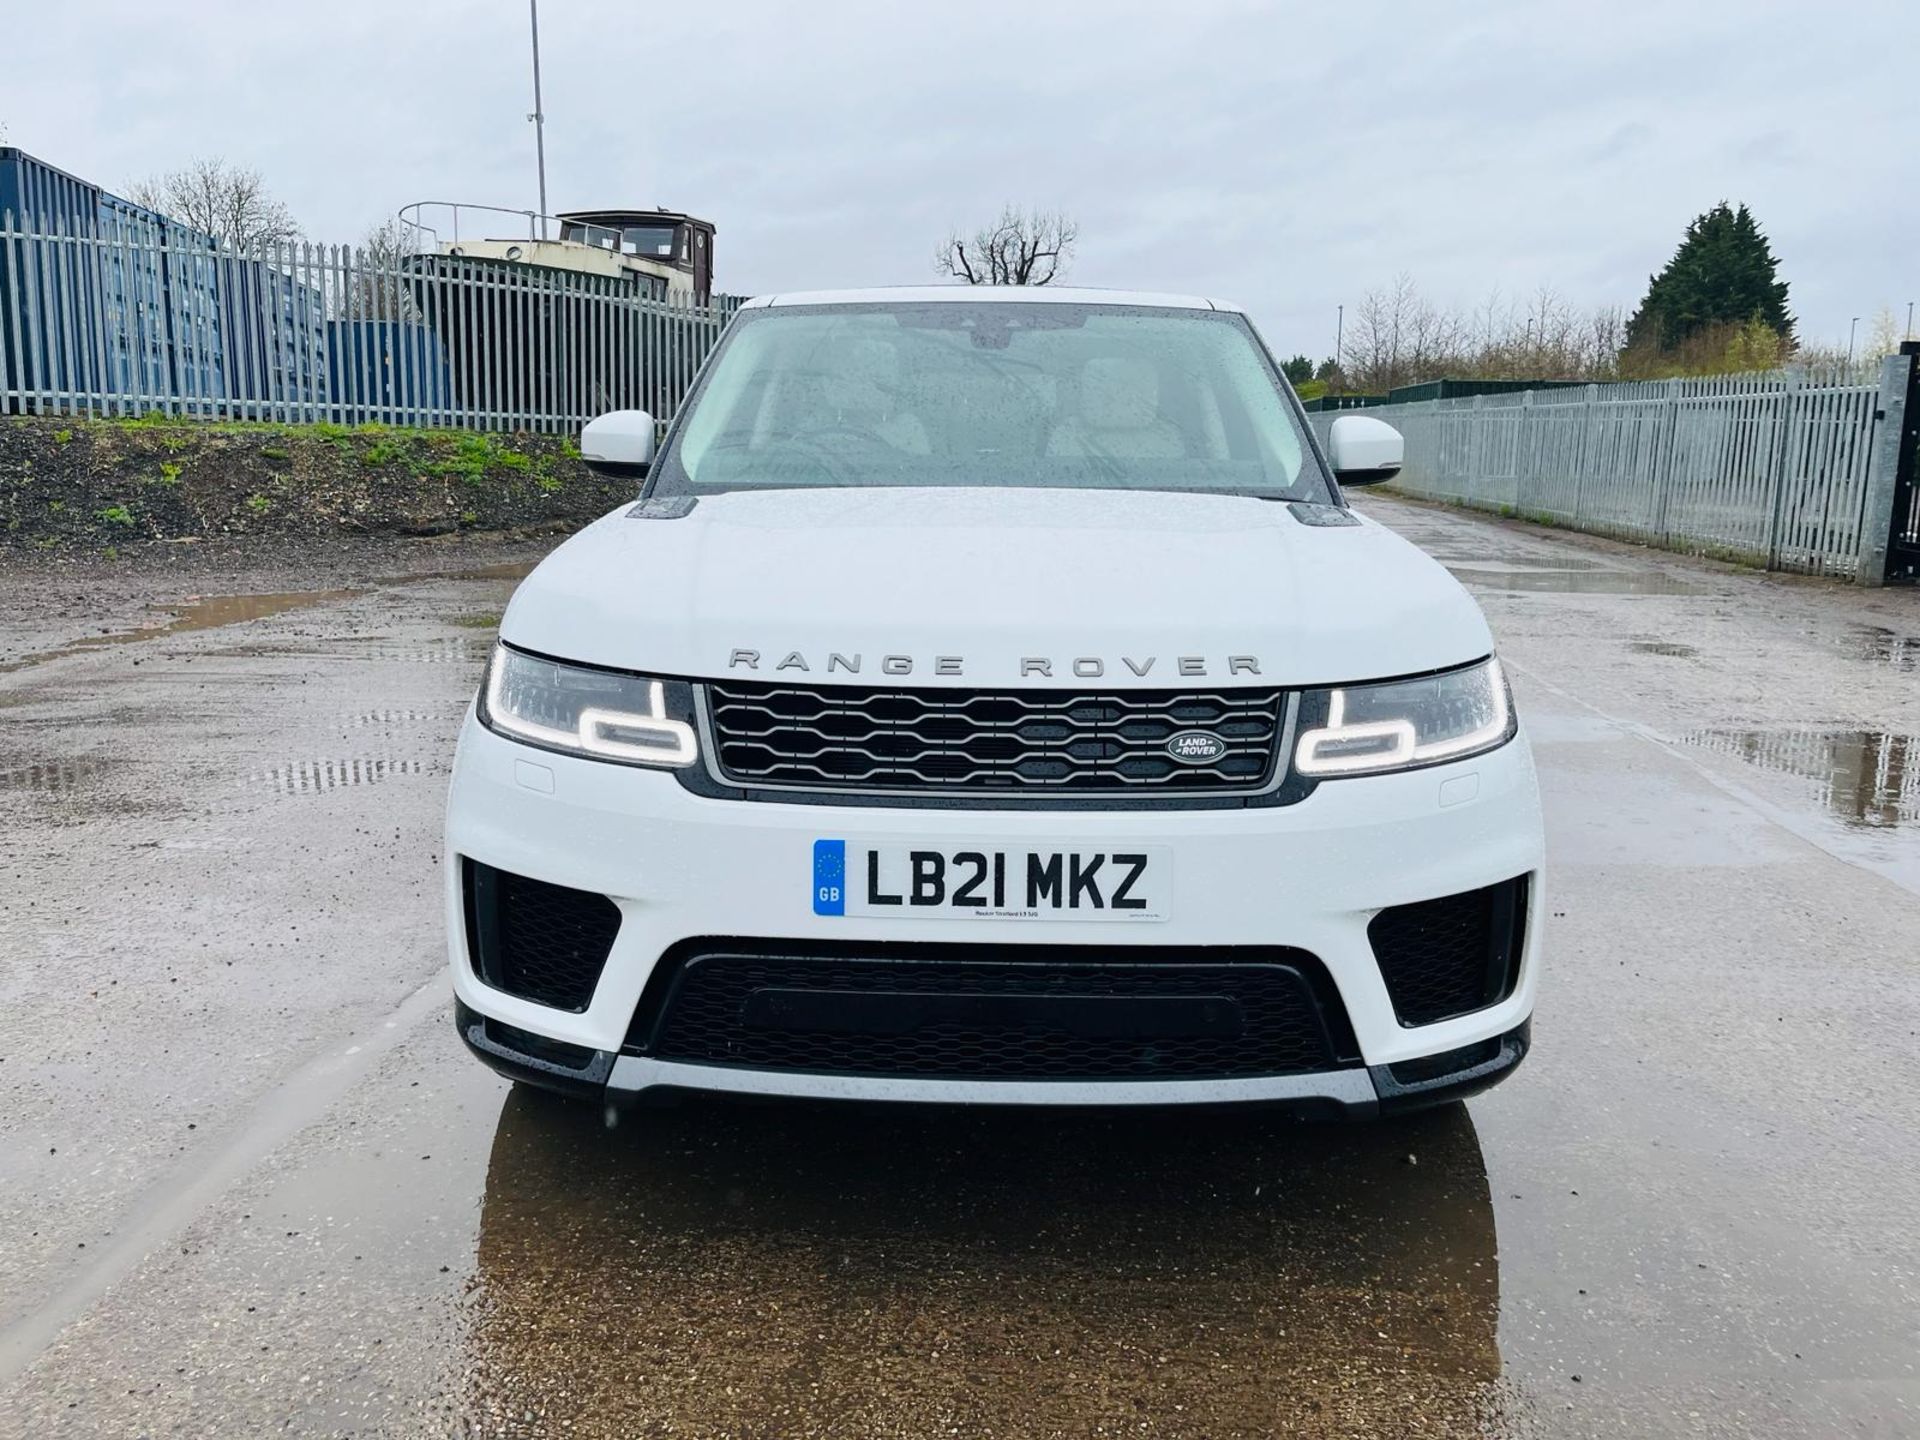 ** ON SALE ** Land Rover Range Rover Sport 2.0 P400E HSE Hybrid 2021 '21 Reg' -Panoramic Roof- - Image 2 of 38